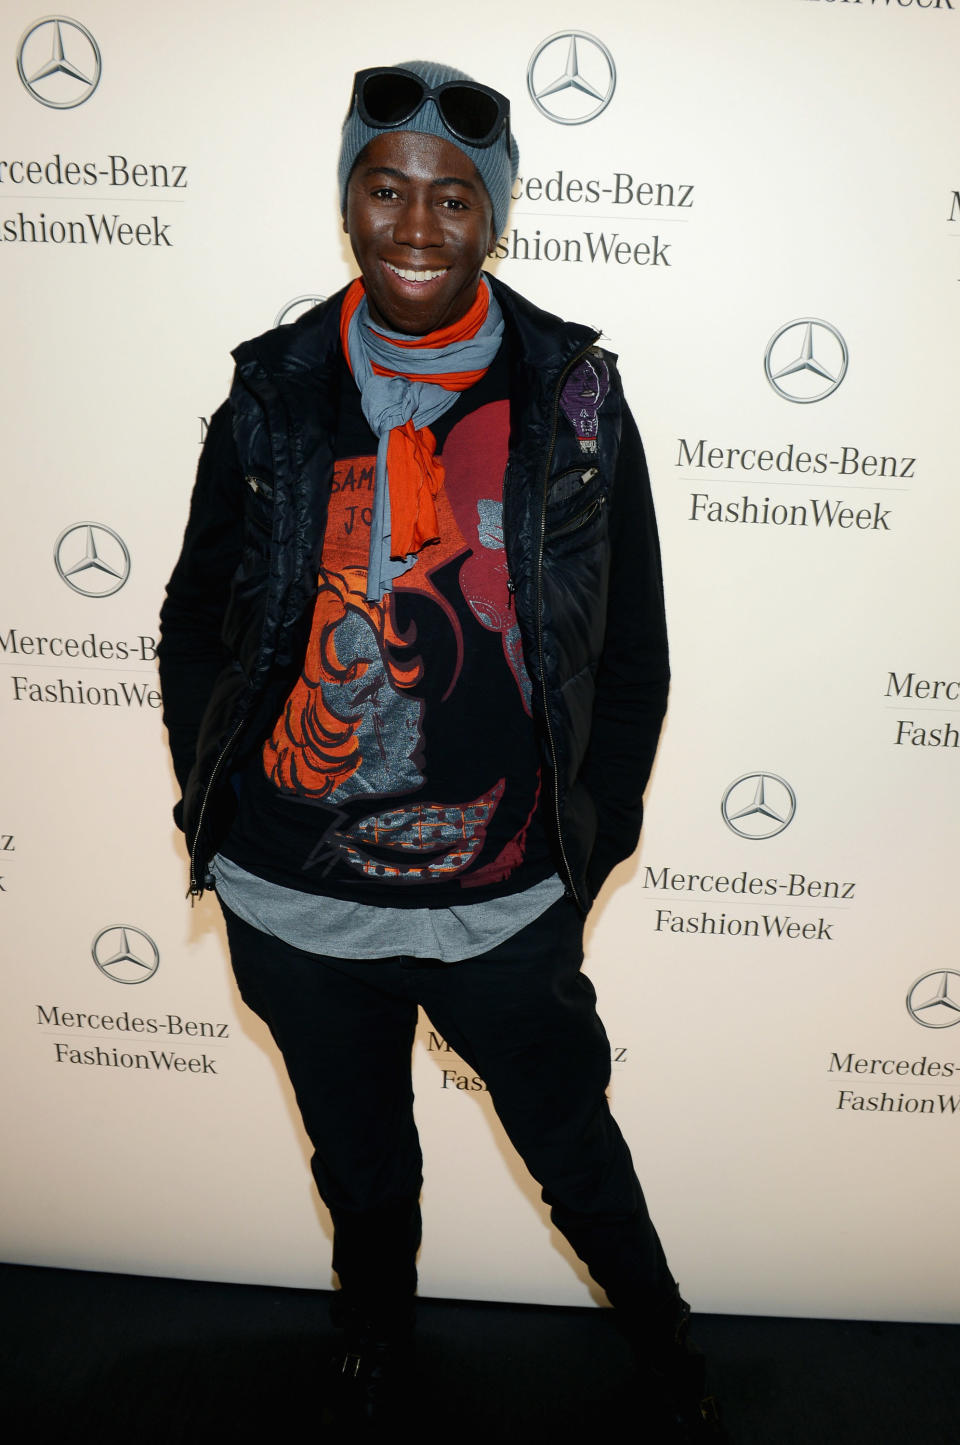 NEW YORK, NY - FEBRUARY 10:  Miss J attends the Mercedes-Benz Start Lounge at Lincoln Center on February 10, 2013 in New York City.  (Photo by Michael Buckner/Getty Images for Mercedes-Benz Fashion Week)